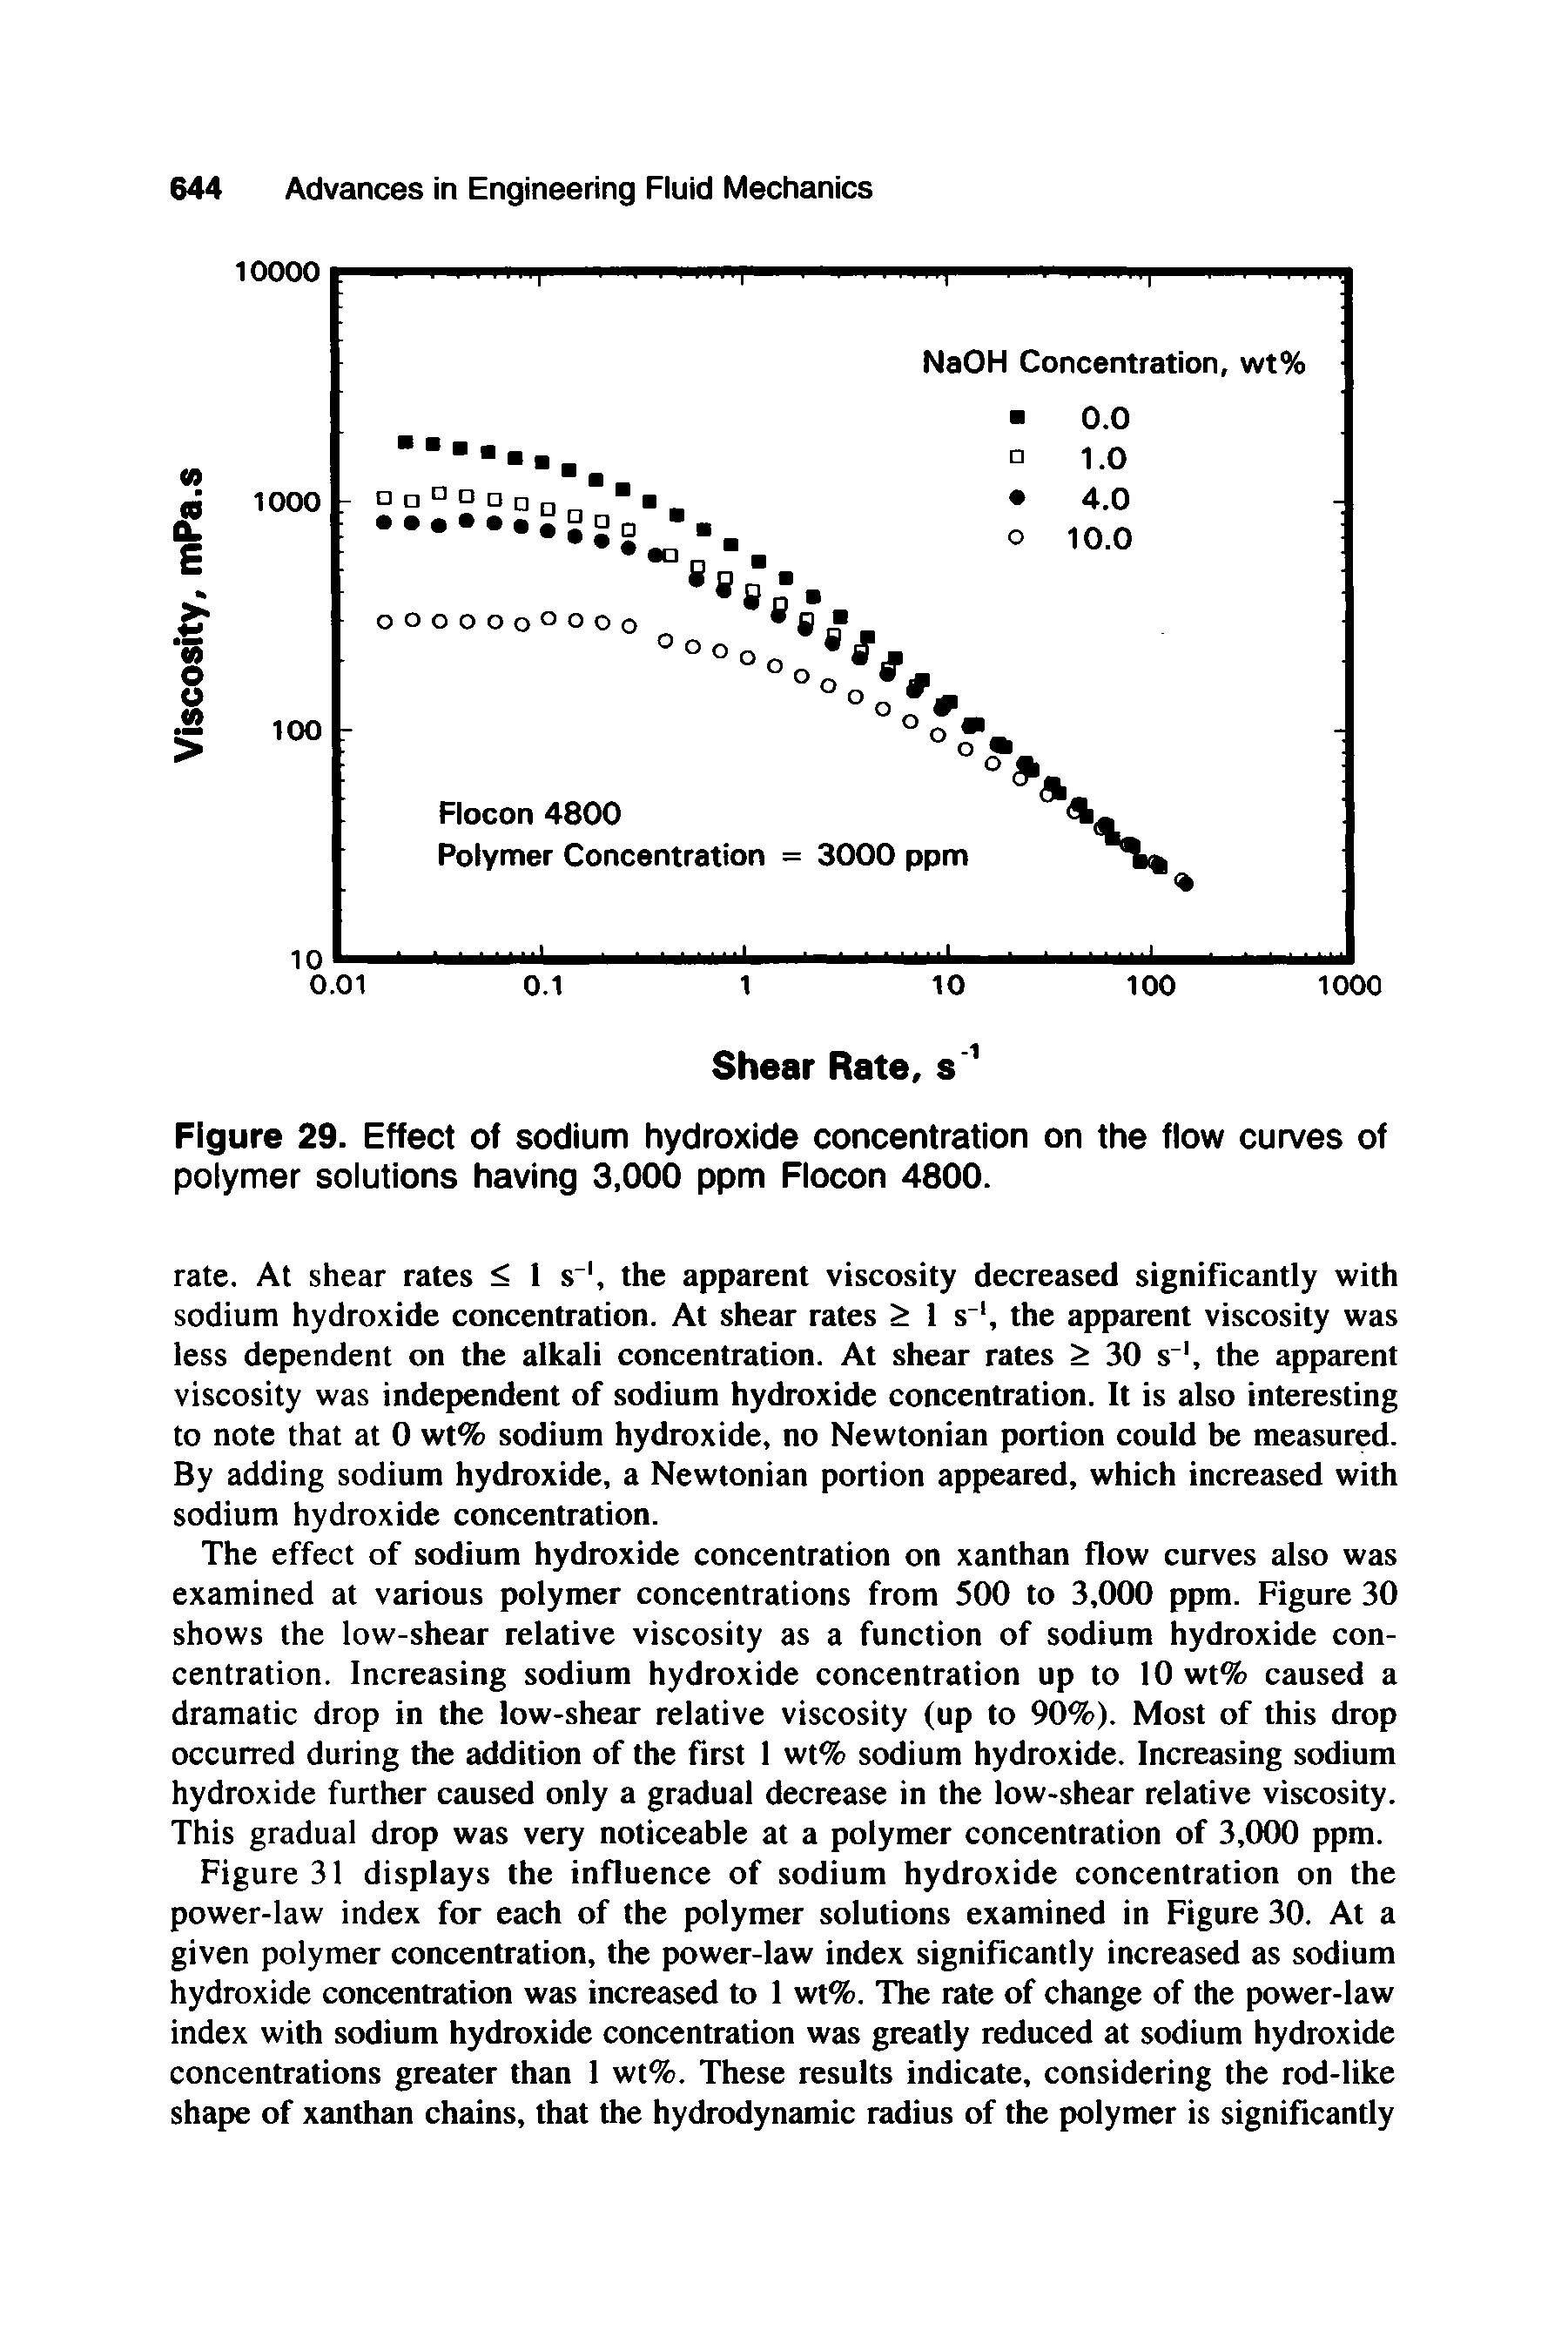 Figure 31 displays the influence of sodium hydroxide concentration on the power-law index for each of the polymer solutions examined in Figure 30. At a given polymer concentration, the power-law index significantly increased as sodium hydroxide concentration was increased to 1 wt%. The rate of change of the power-law index with sodium hydroxide concentration was greatly reduced at sodium hydroxide concentrations greater than 1 wt%. These results indicate, considering the rod-like shape of xanthan chains, that the hydrodynamic radius of the polymer is significantly...